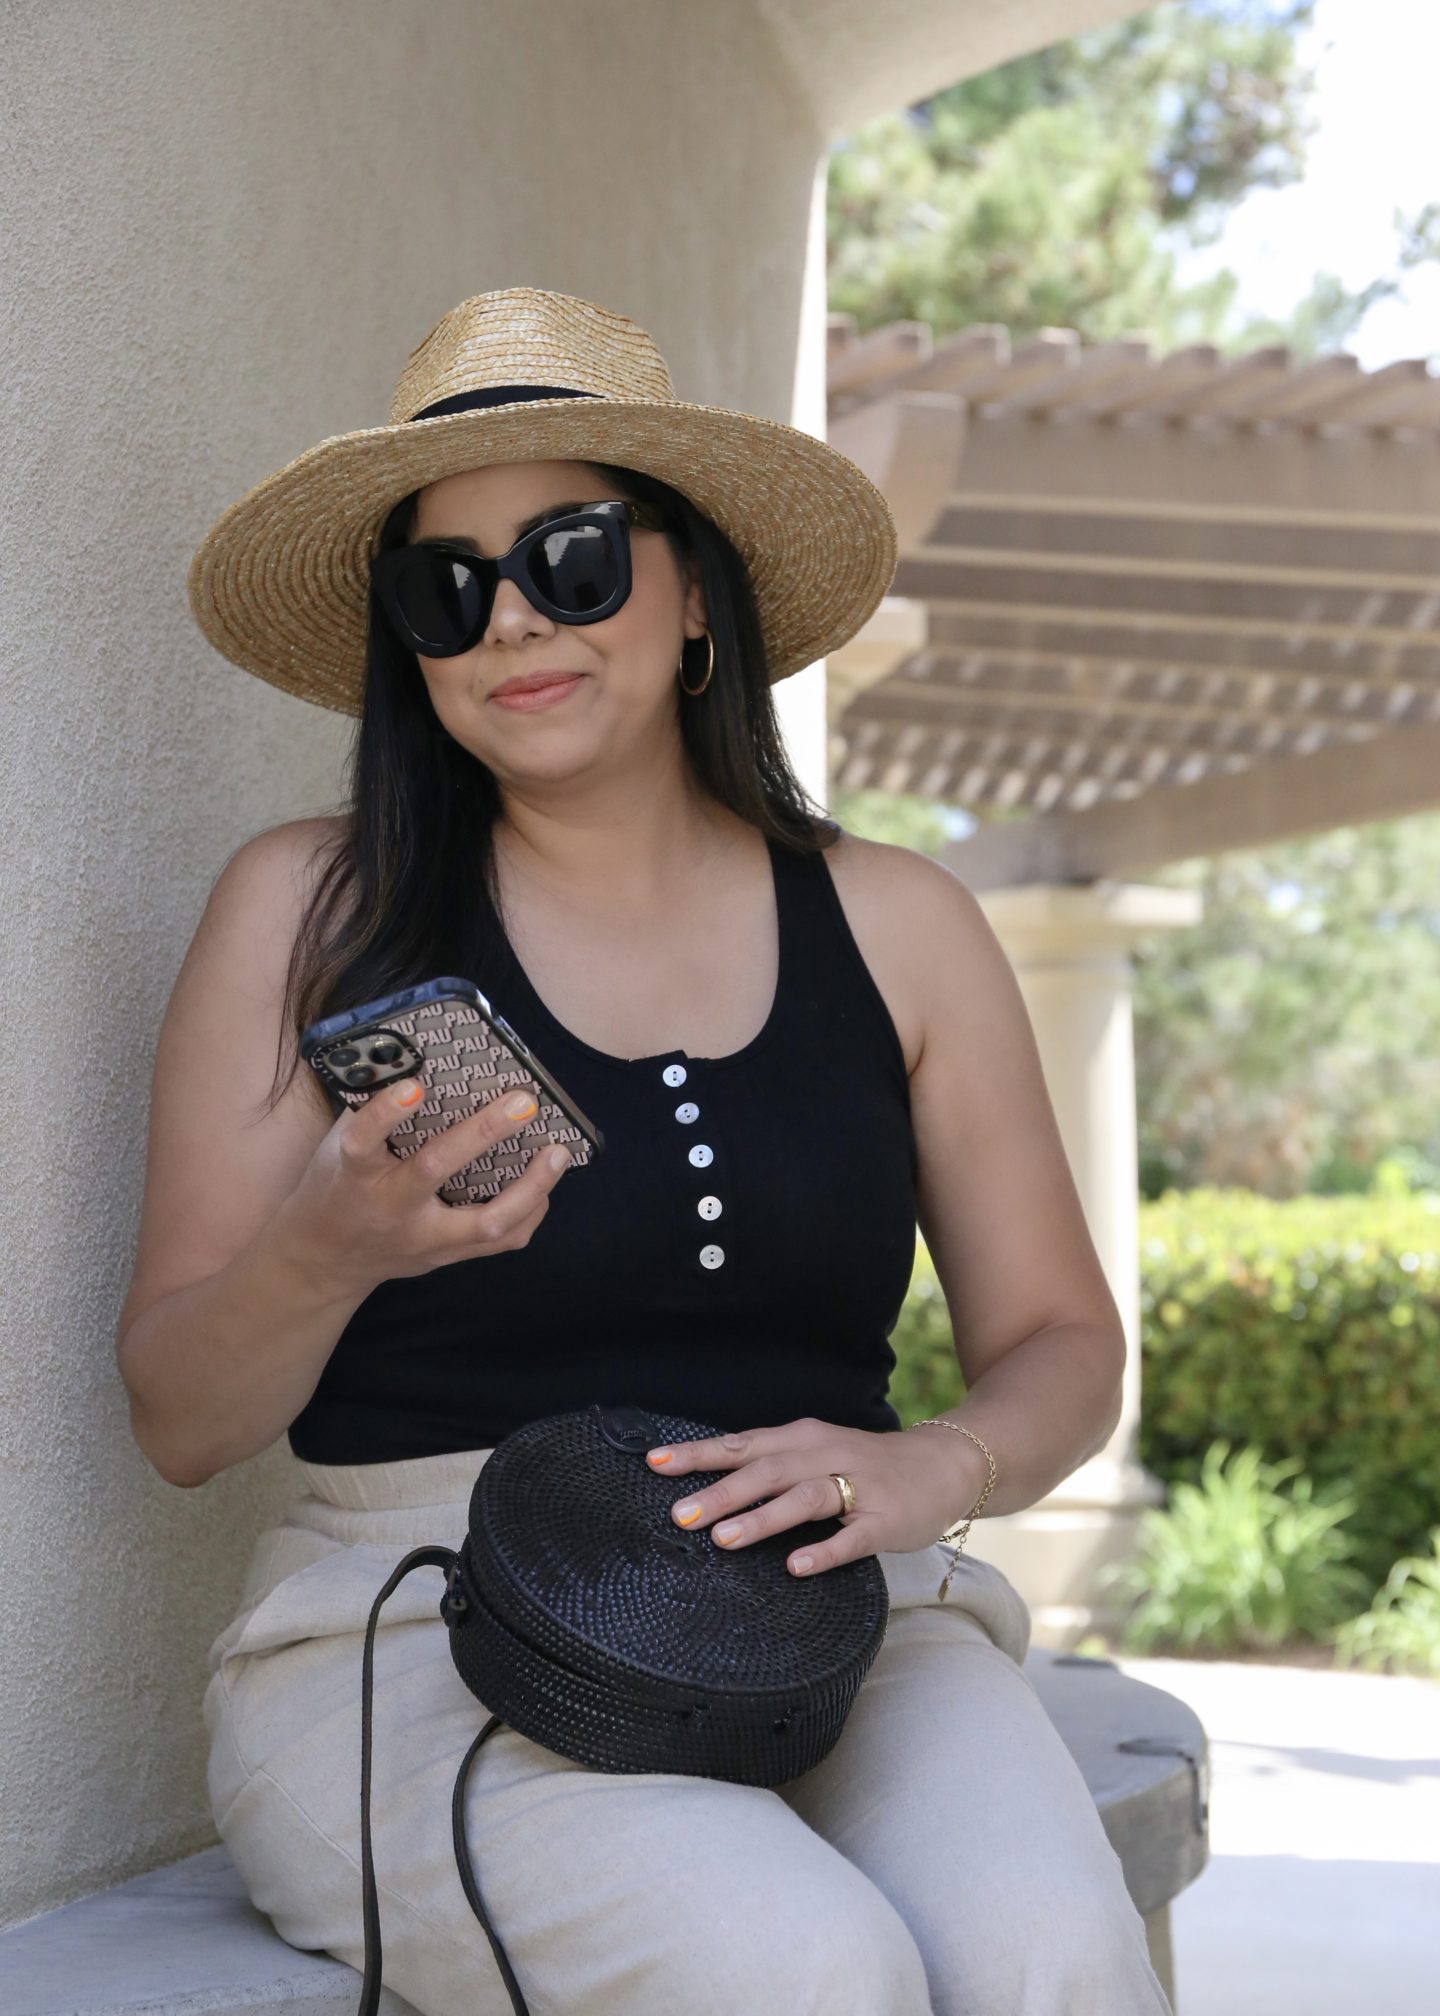 Joanna straw hat outfit, latina style blogger blog post